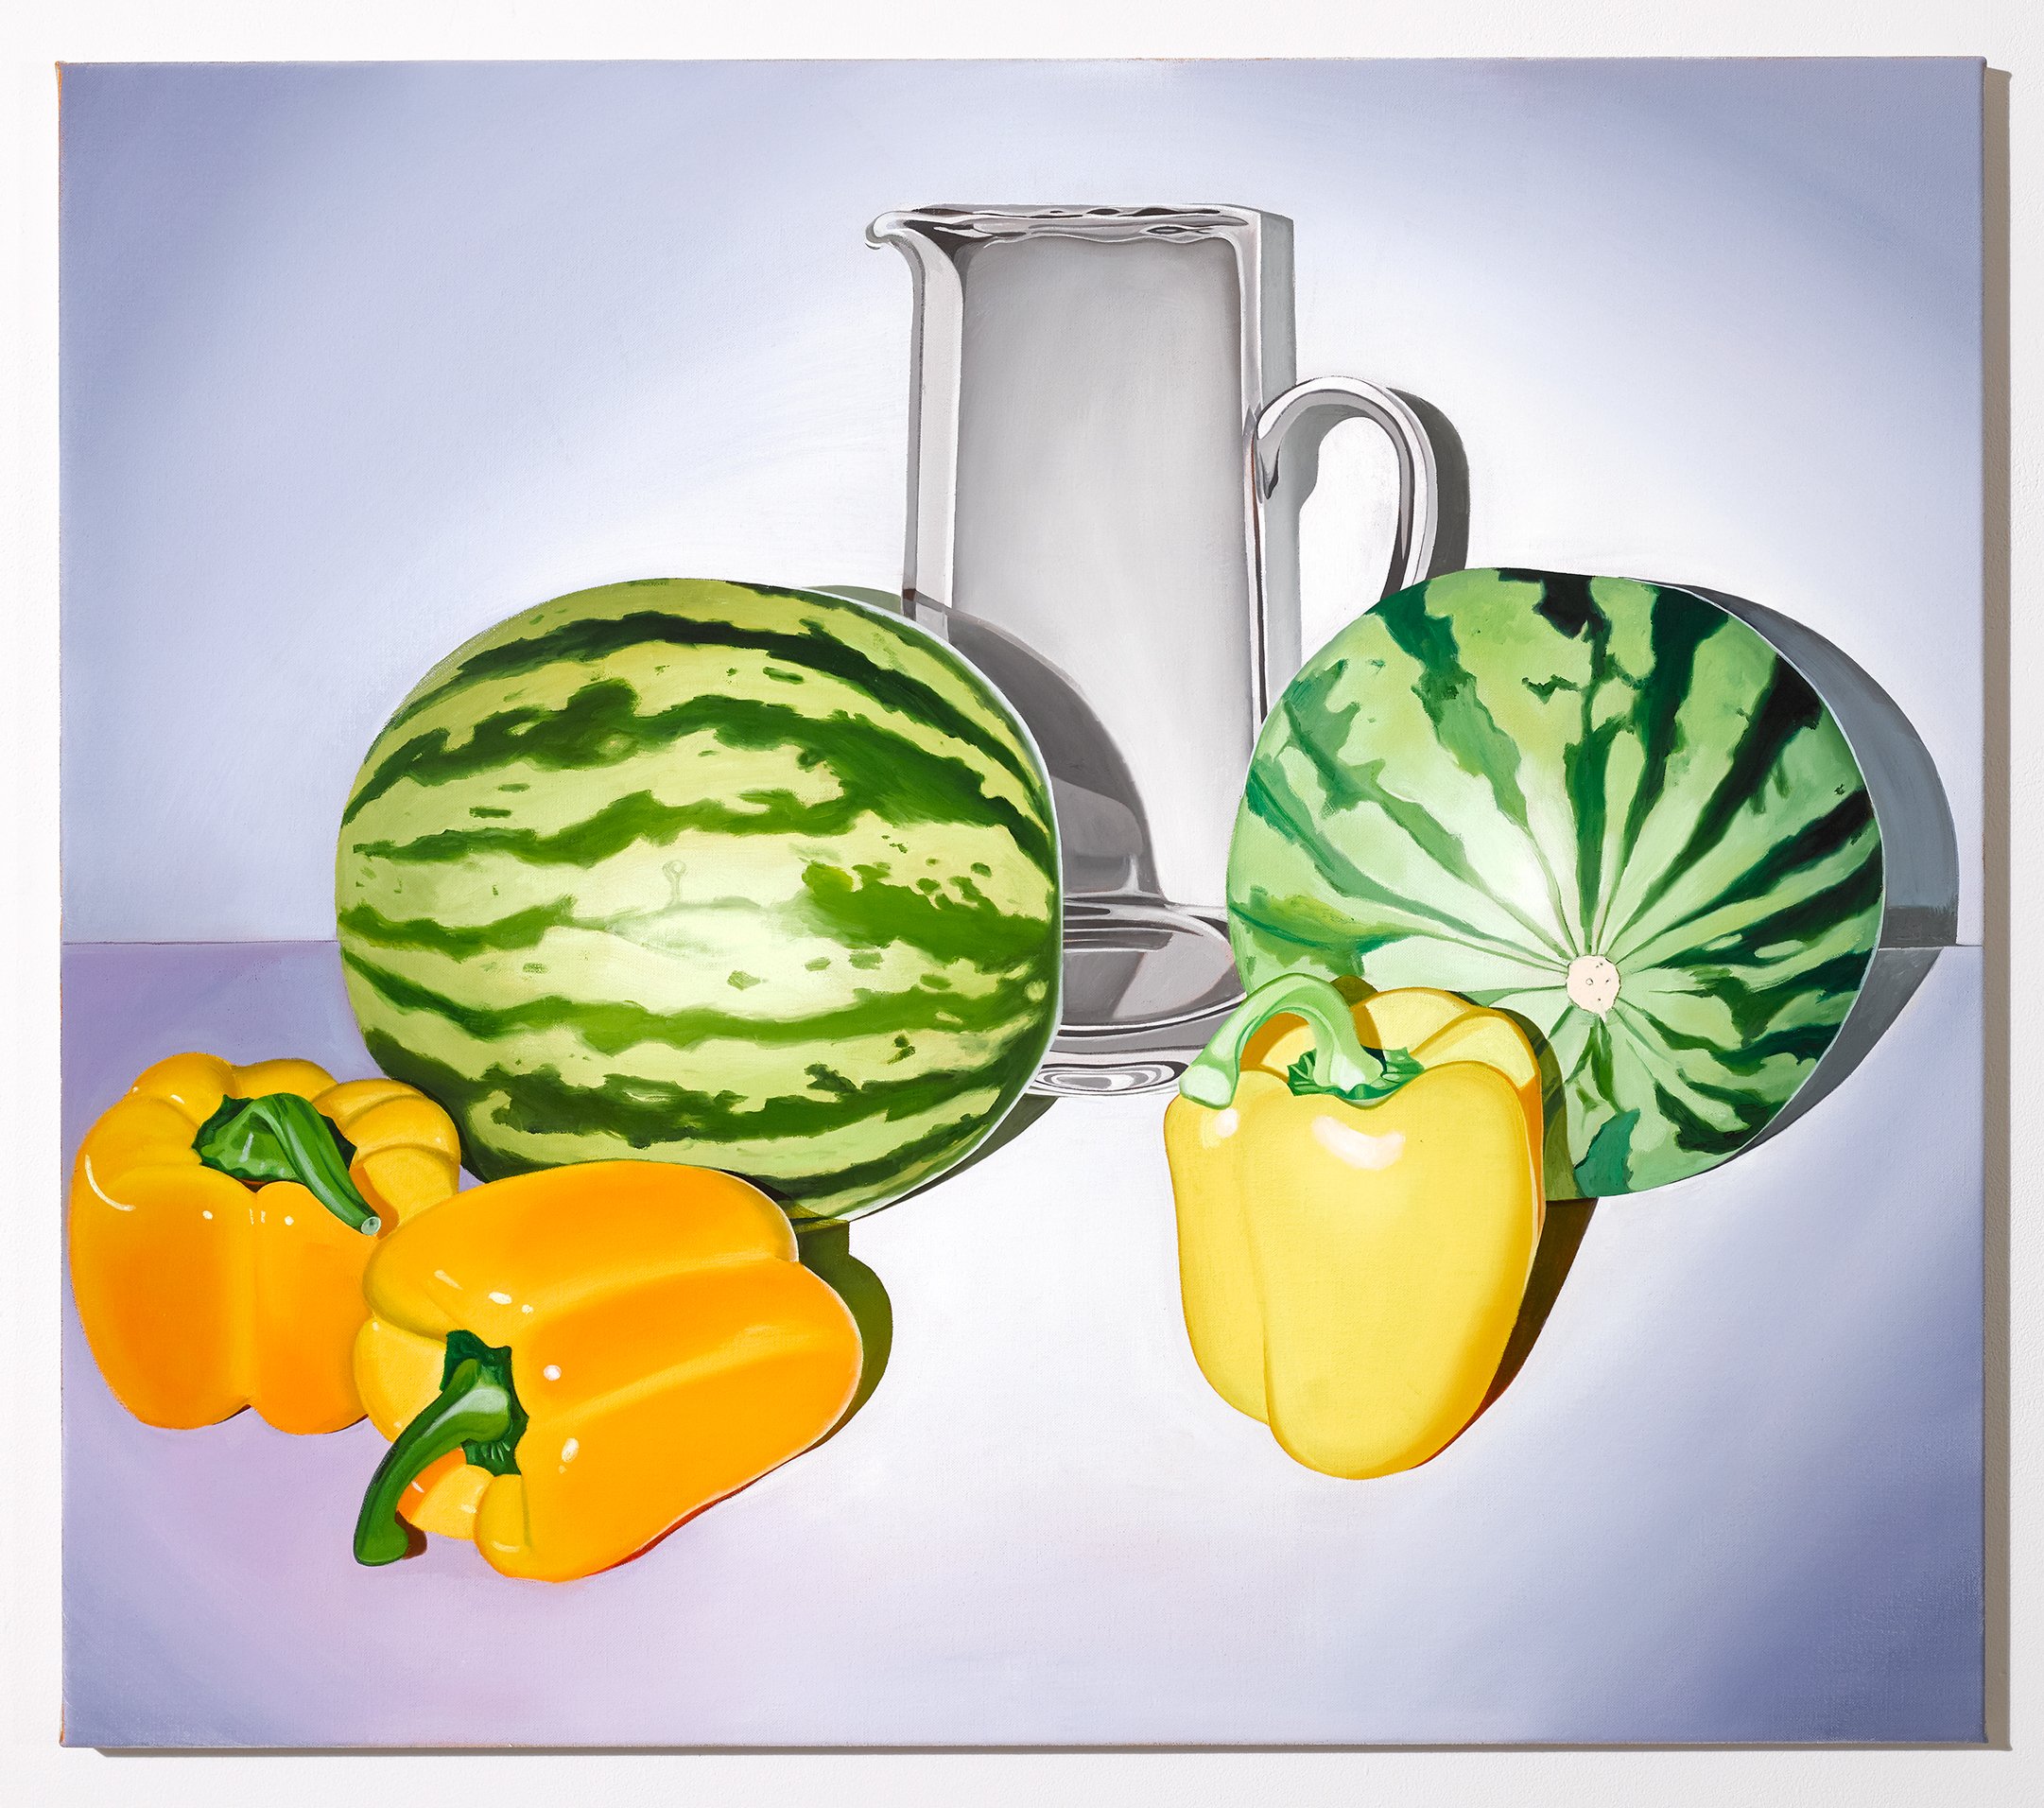  Still Life 2021 (limelight) (2021)  Oil on linen  70 x 80cm  Private Collection 